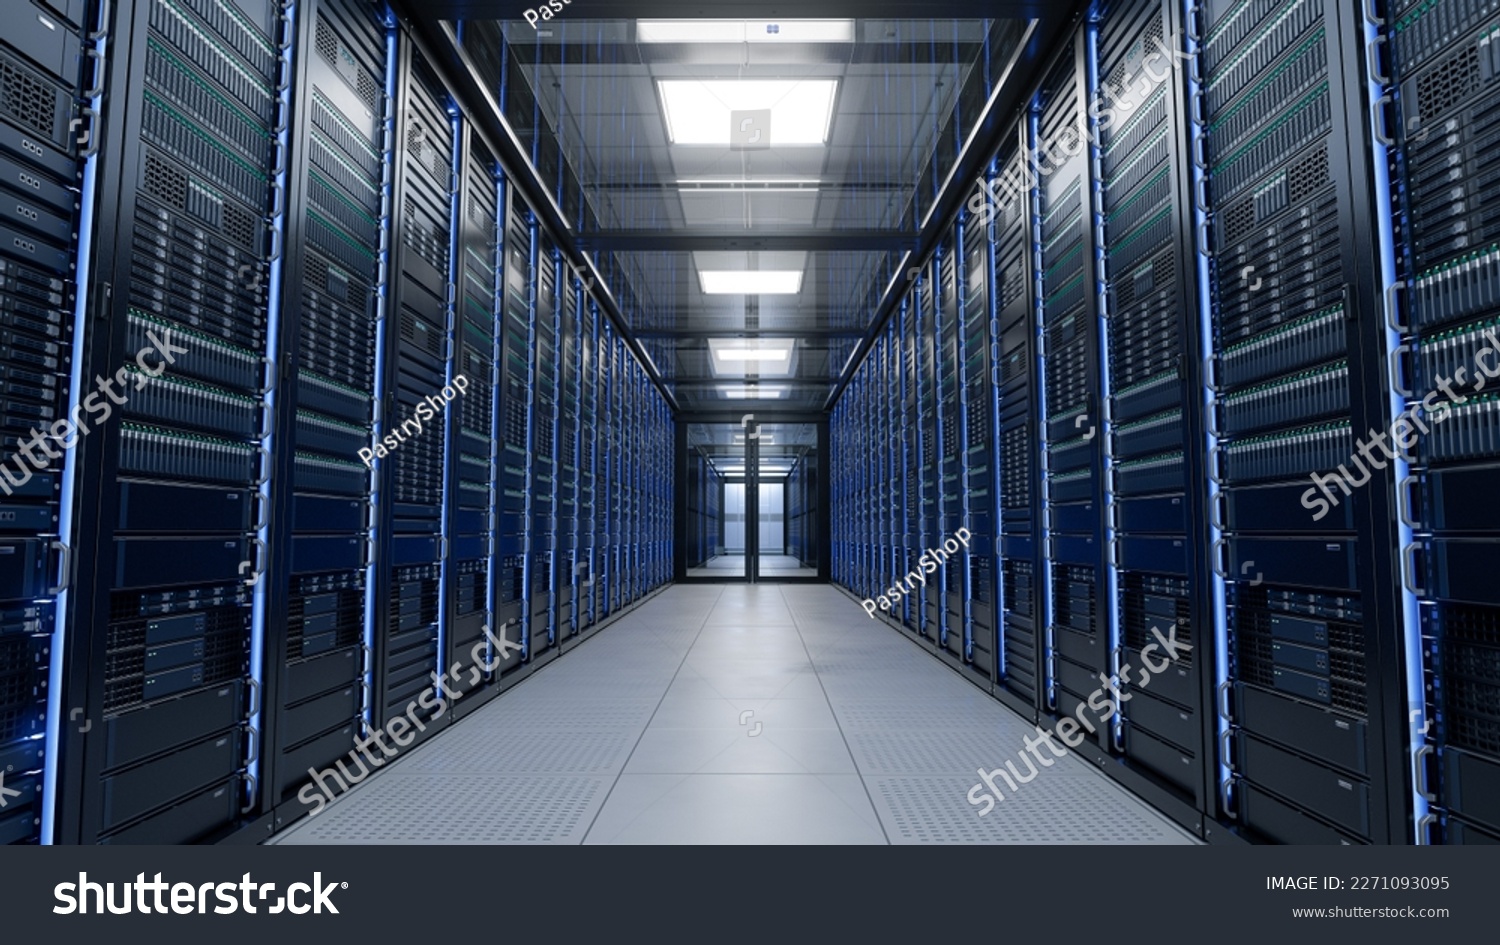 Inside Large Data Center. Advanced Cloud Computing Concept. Corridor with Server Racks and Cabinets full of Hard Drives #2271093095